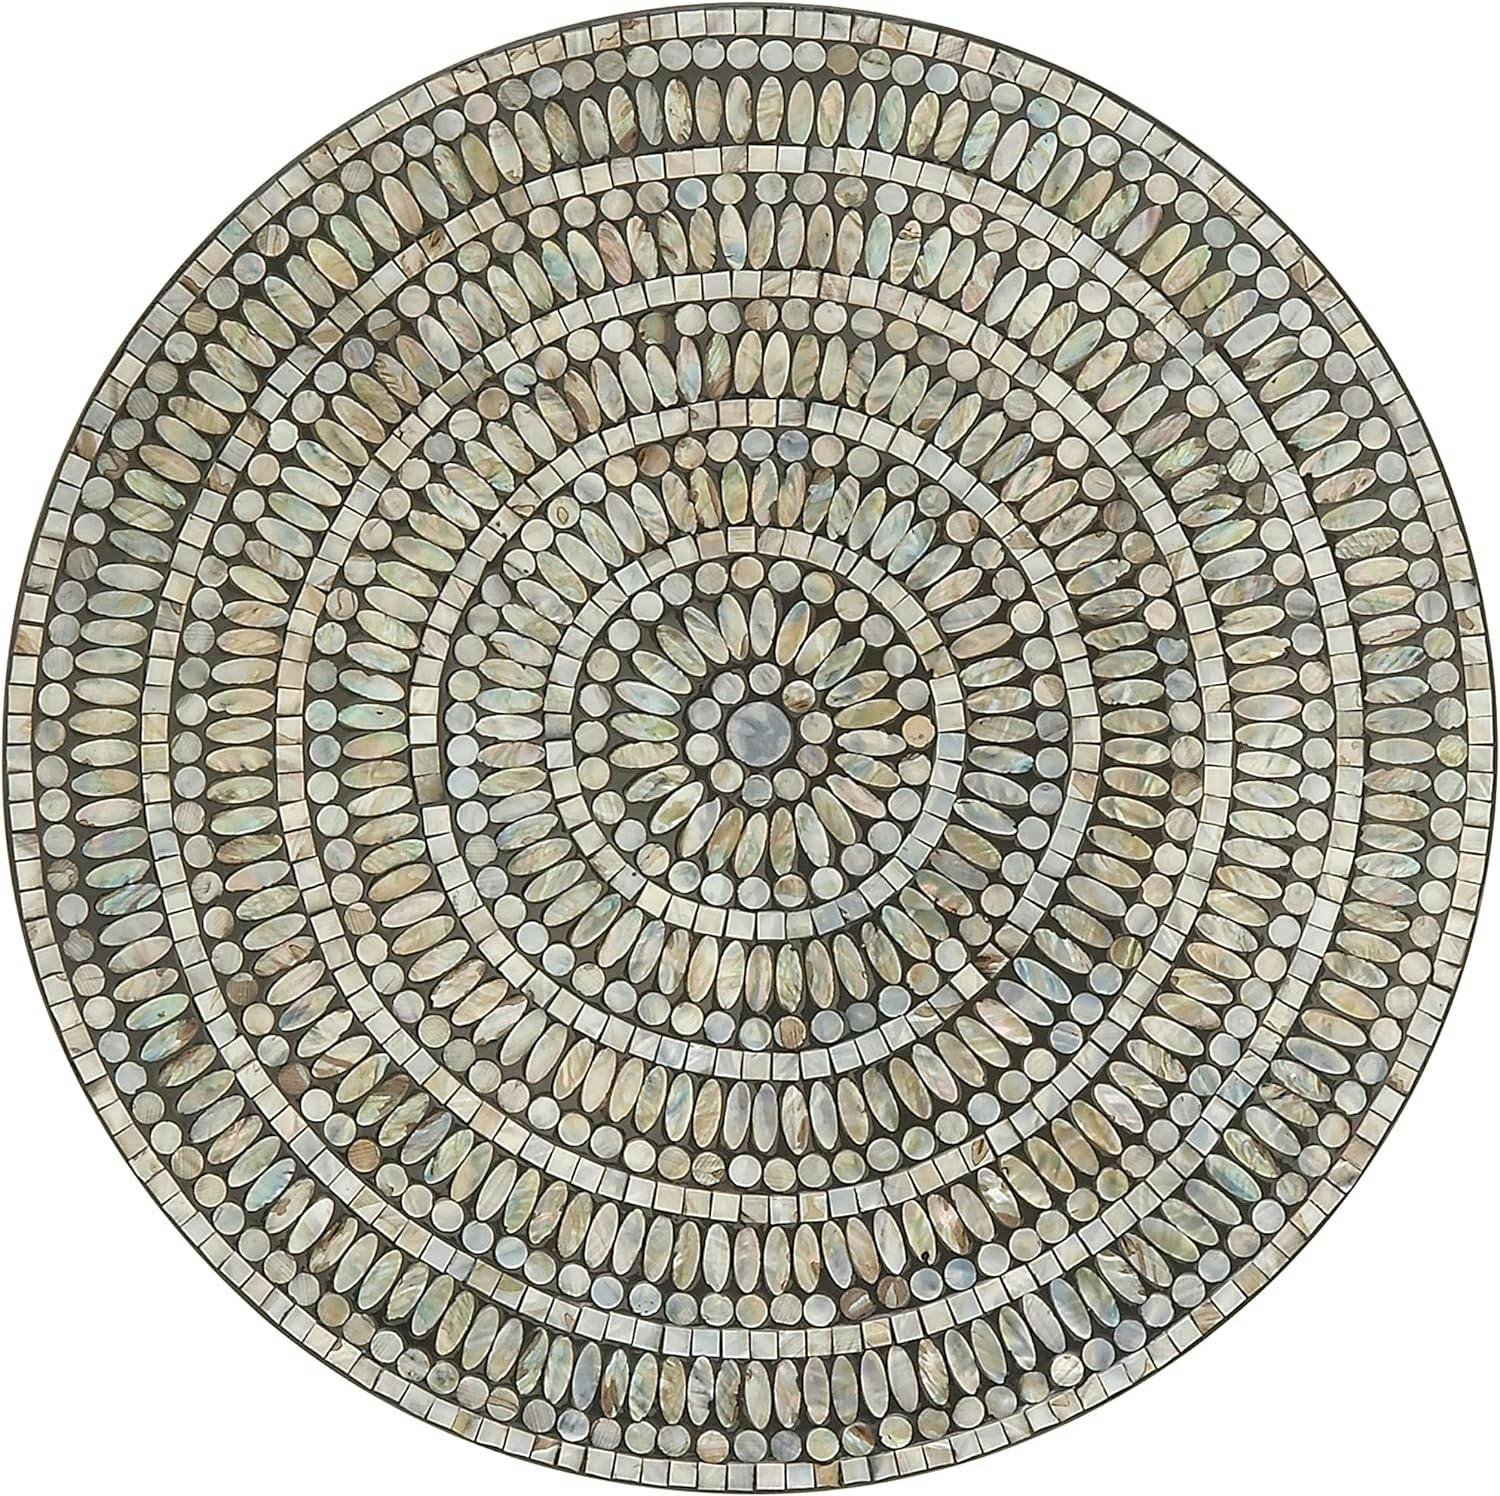 27" Space-Themed Round Wooden Wall Decor with Pearl Mosaic